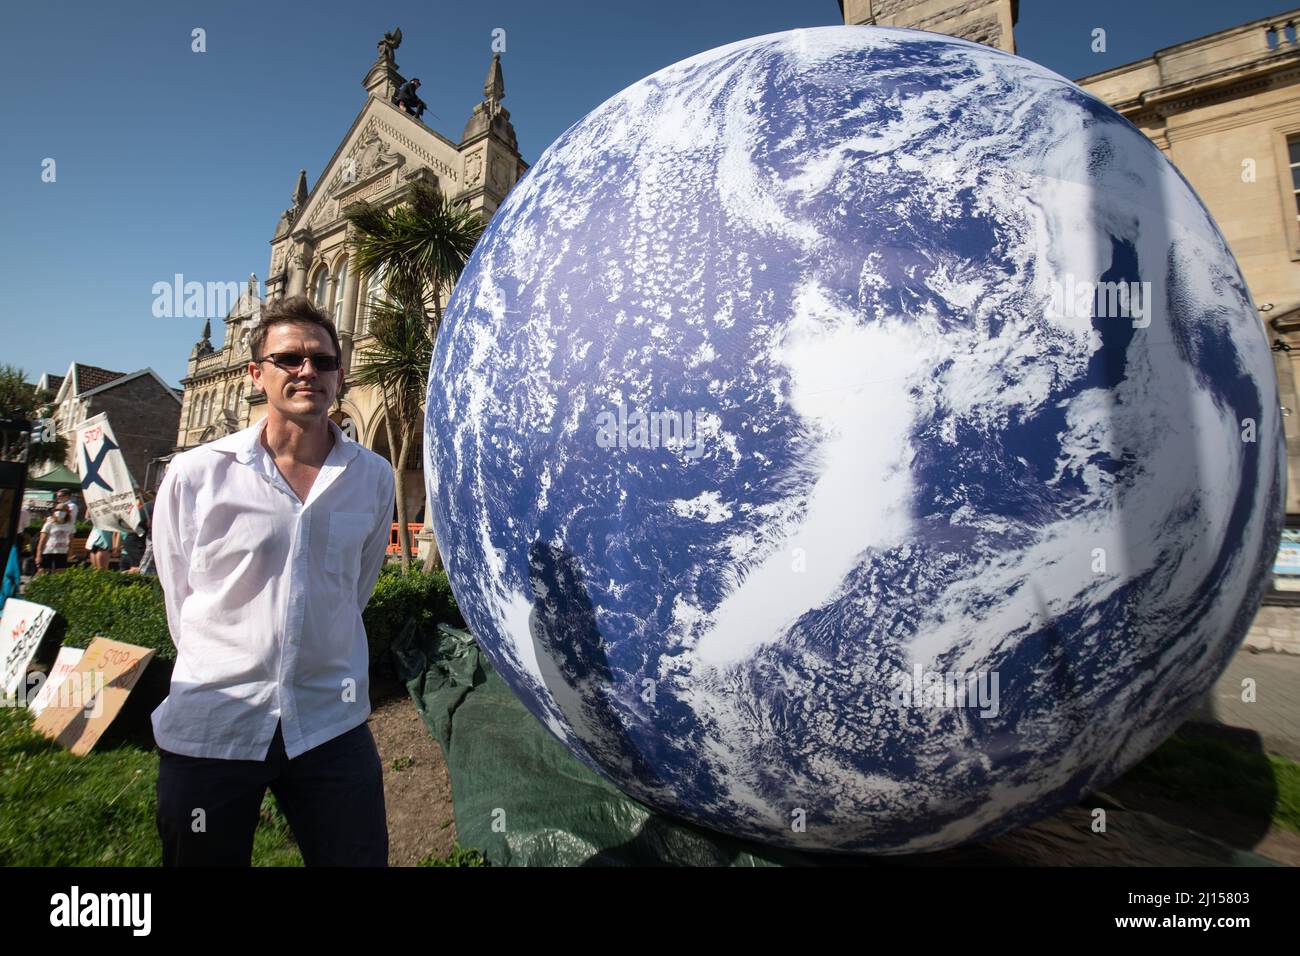 Weston-super-Mare, North Somerset, UK. 20th July 2021. Pictured: Luke Jerram together with one of his 'Gaia' art works outside Weston-super-Mare Town Stock Photo